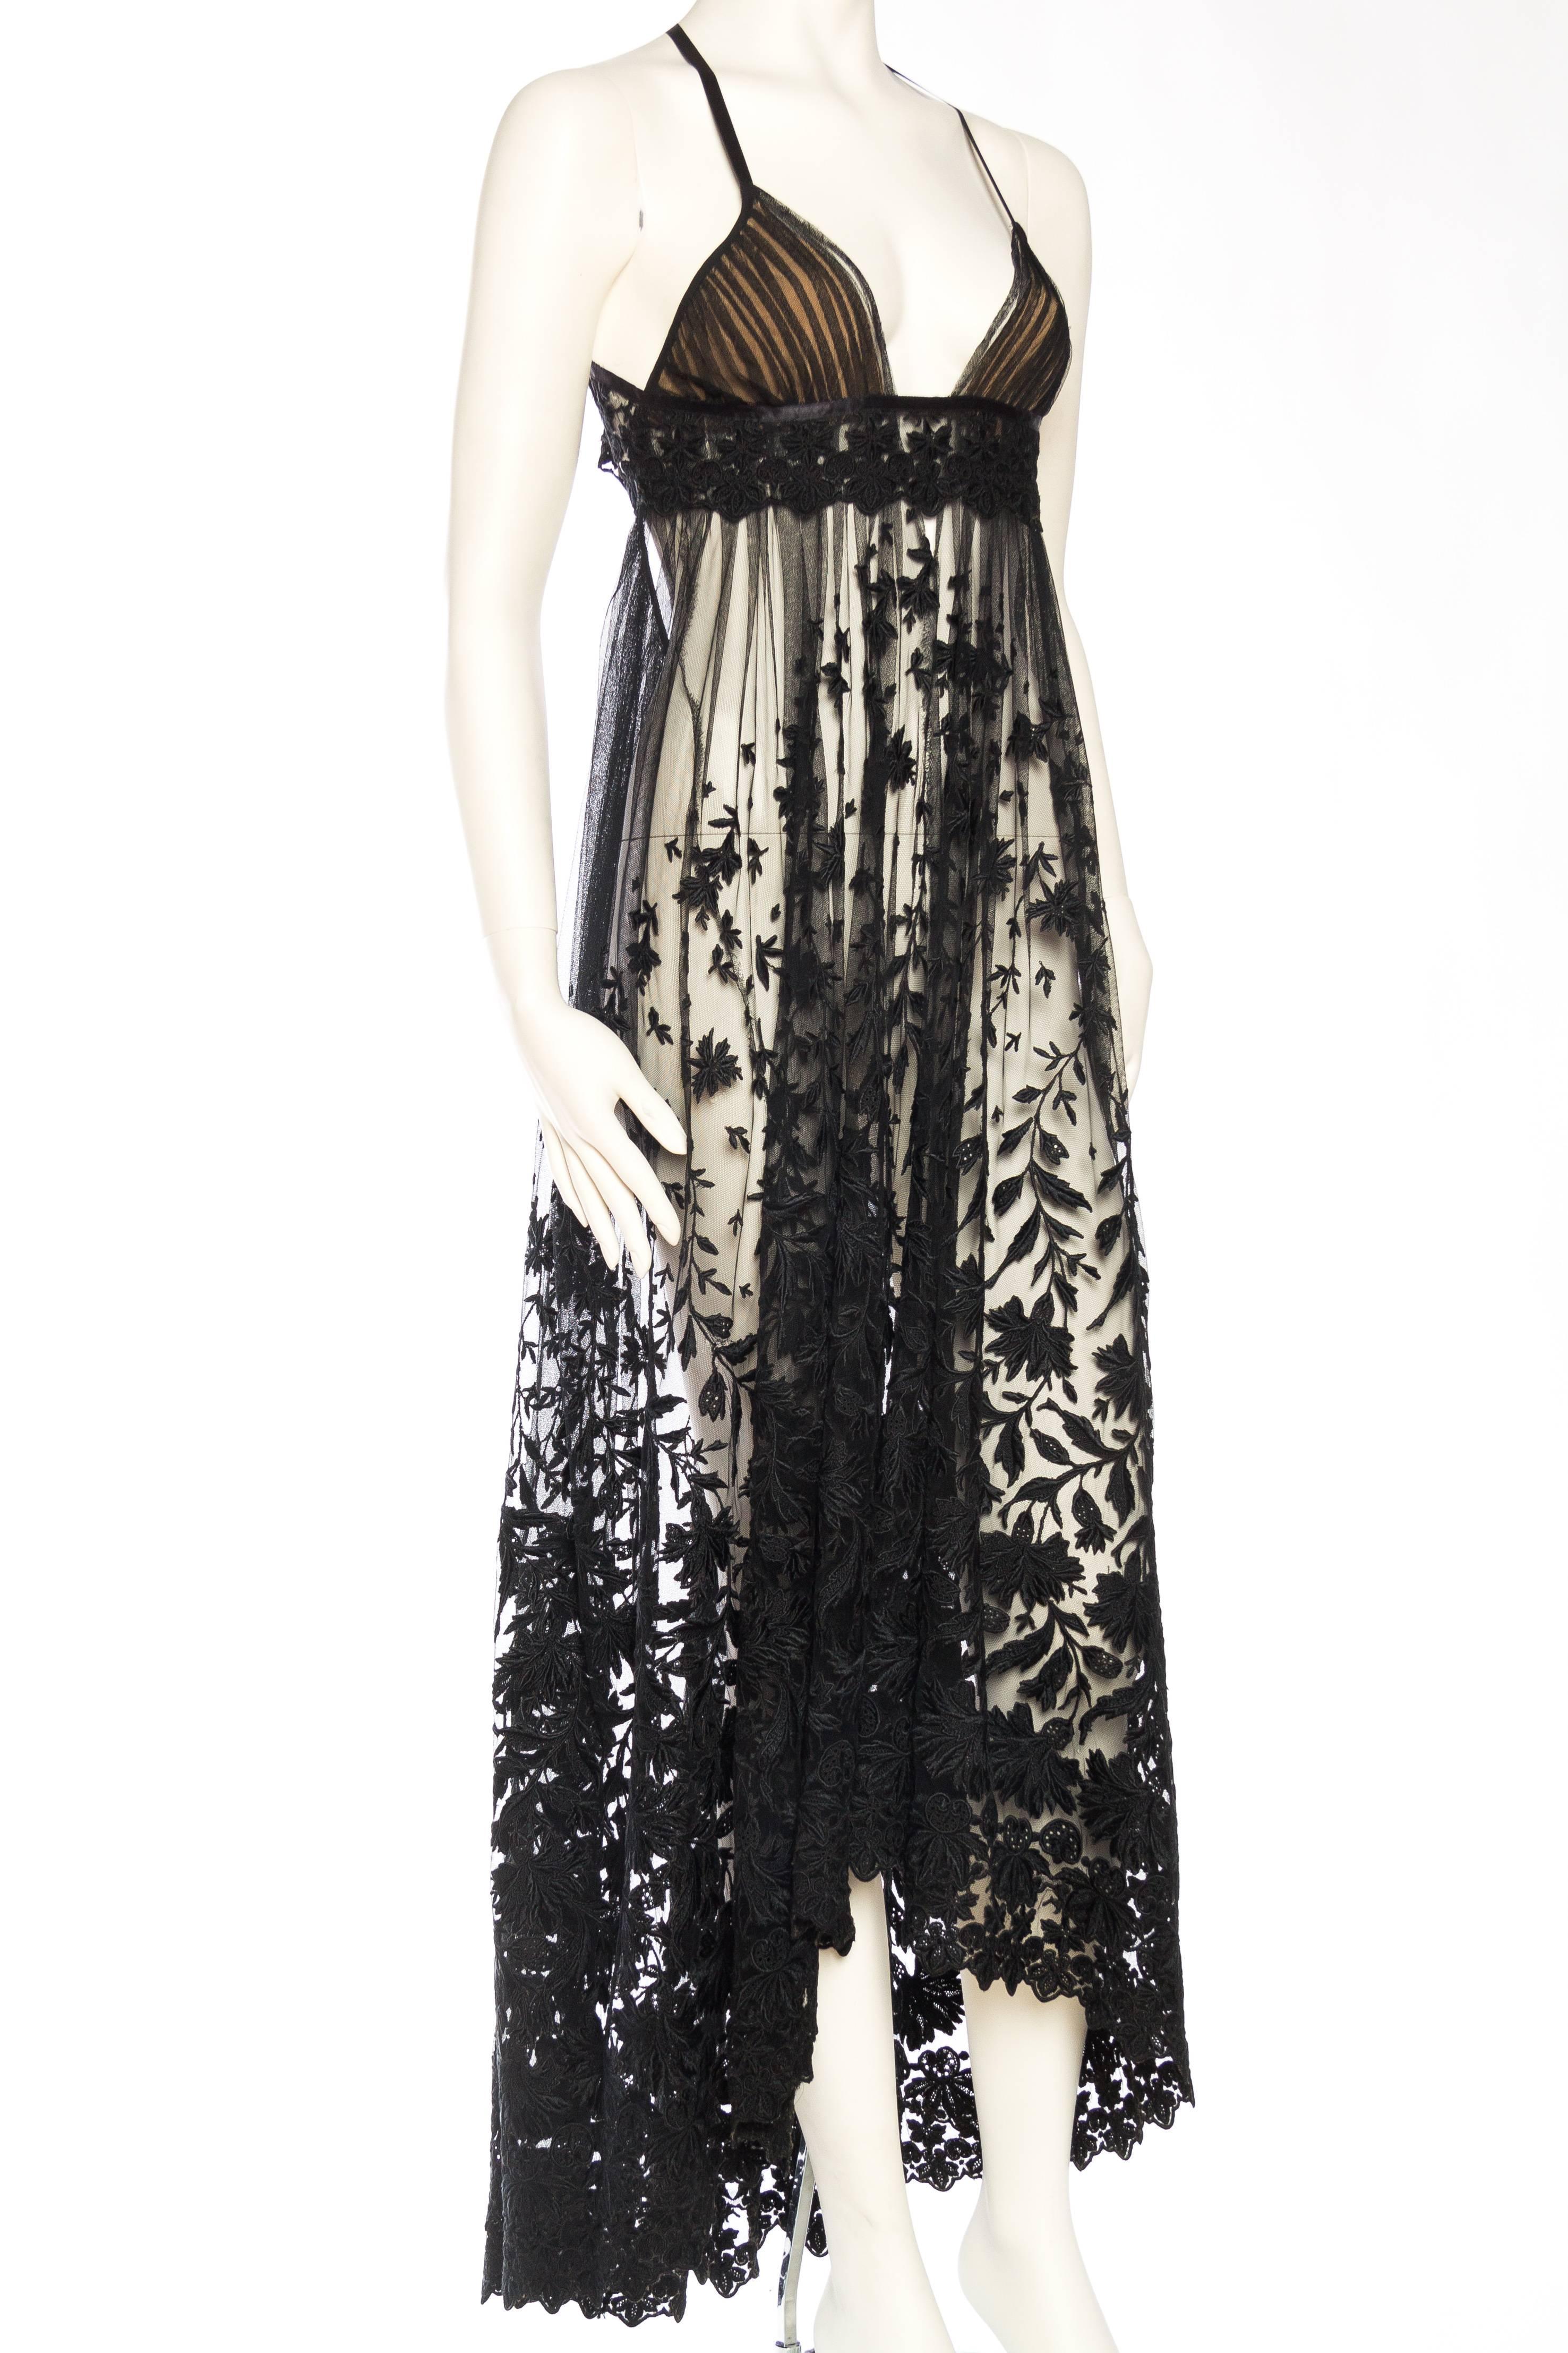 Black Sheer Victorian Lace Net Dress with Floral Embroidery